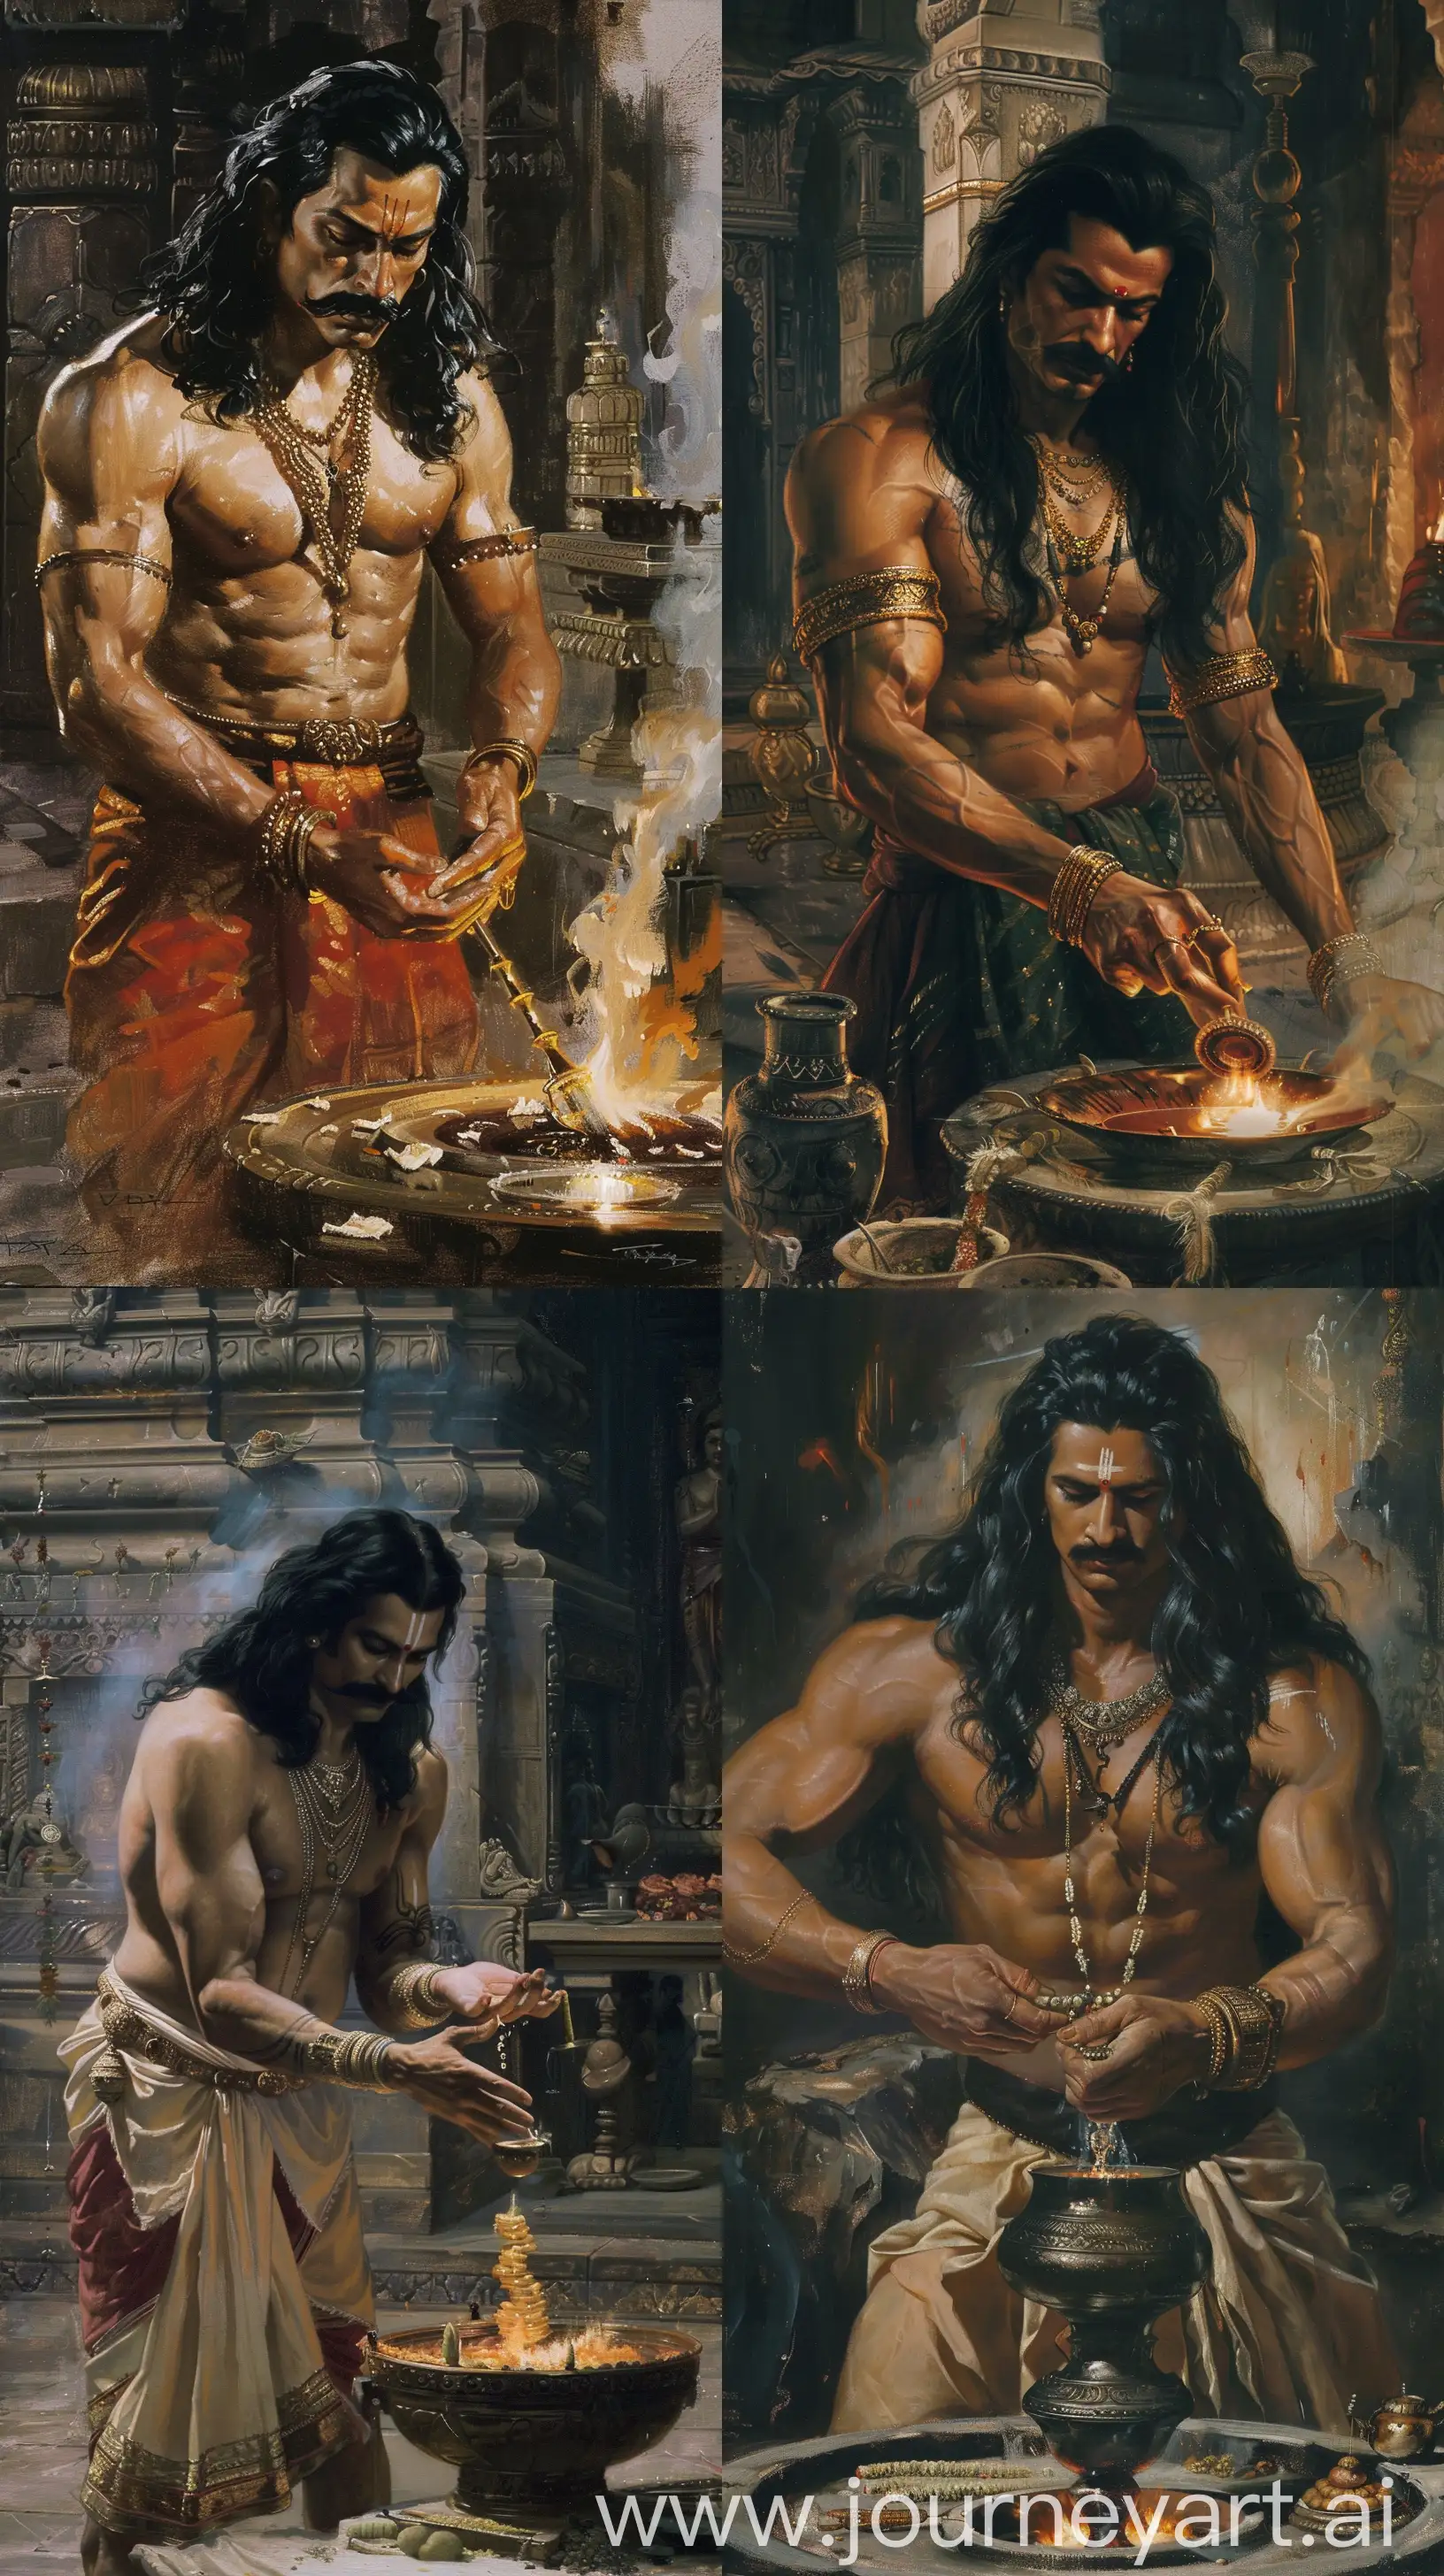 Raj Ravi Varma art style depicting The Daitya king Bali doing yajna, he's a muscular Indian man in his forties, with a long black hair and a moustache, he's performing a yagna ritual, intricate details, 8k quality image --ar 9:16 --v 6